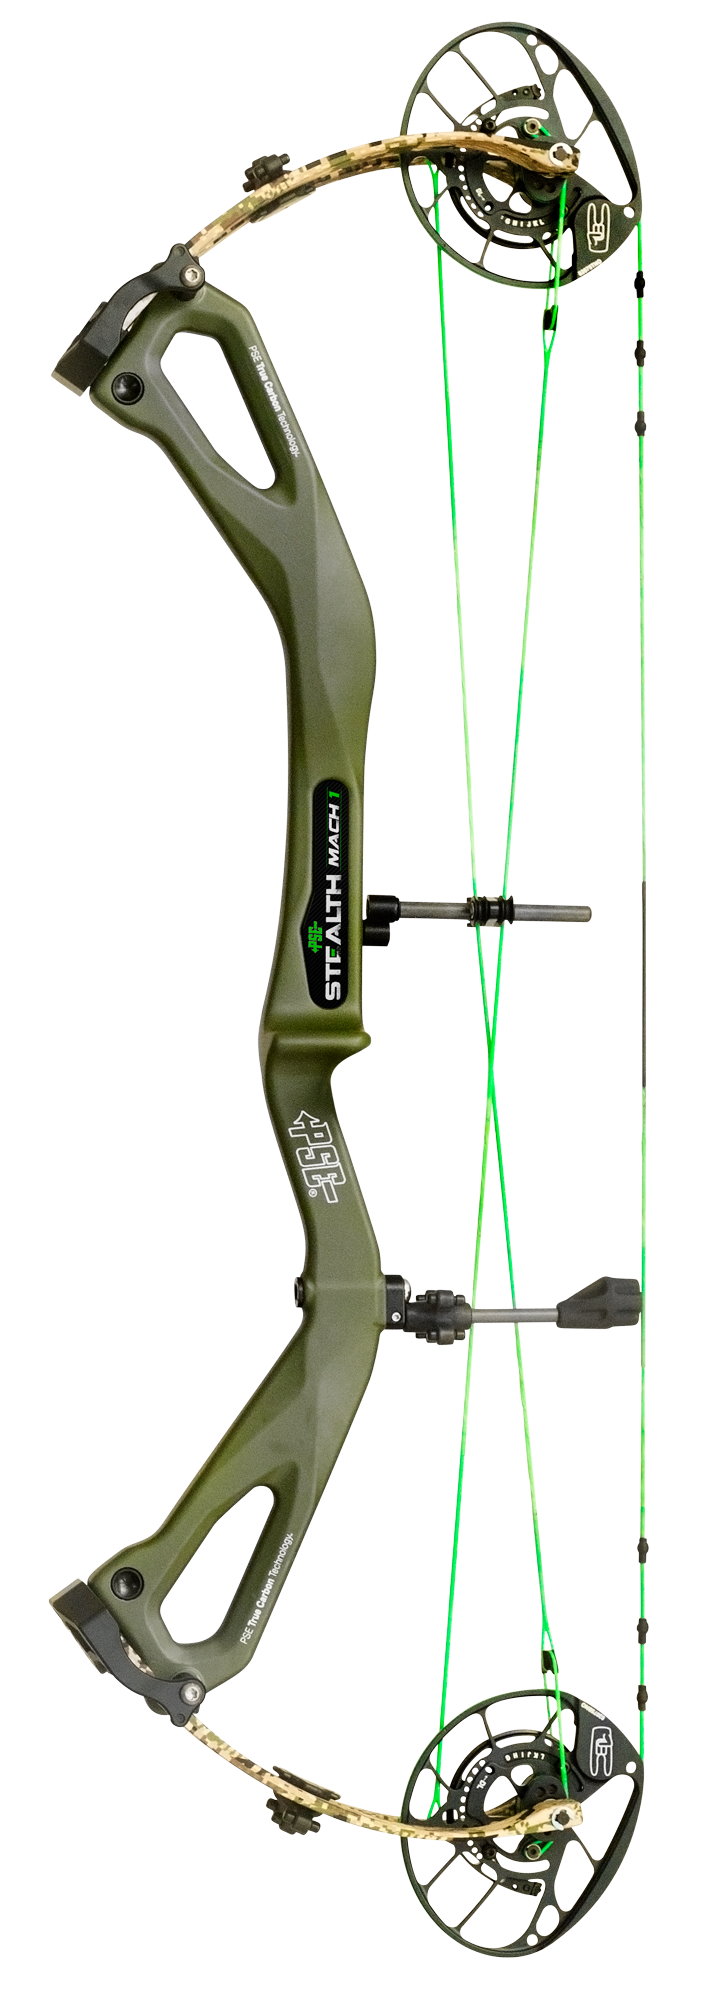 PSE Nock On Carbon Air Mach 1 Compound Bow